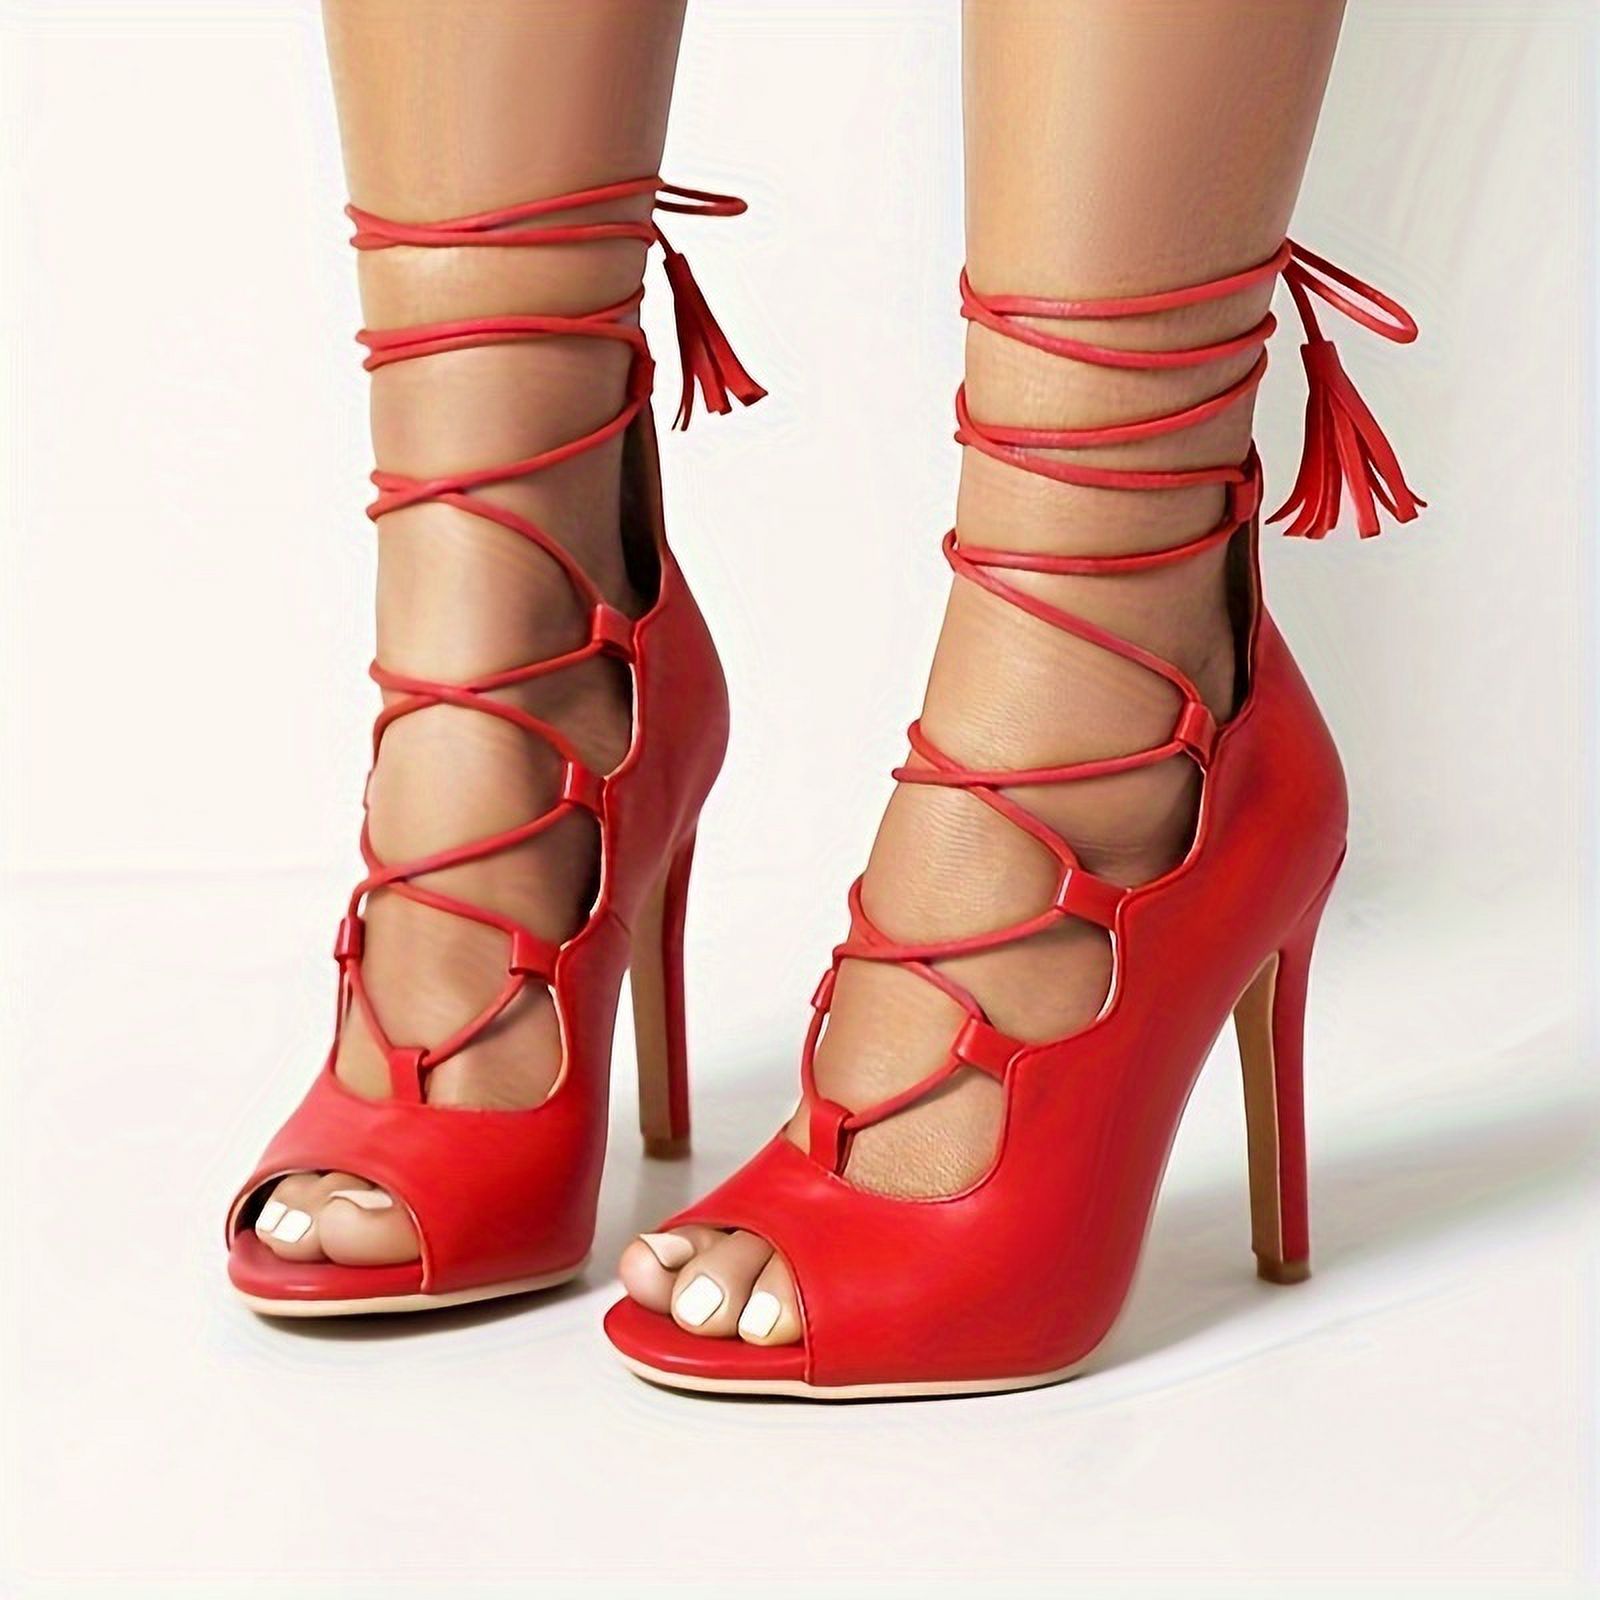 KINODAY Women Red Open Toe Lace Up High Heels Stiletto Heeled Ankle ...